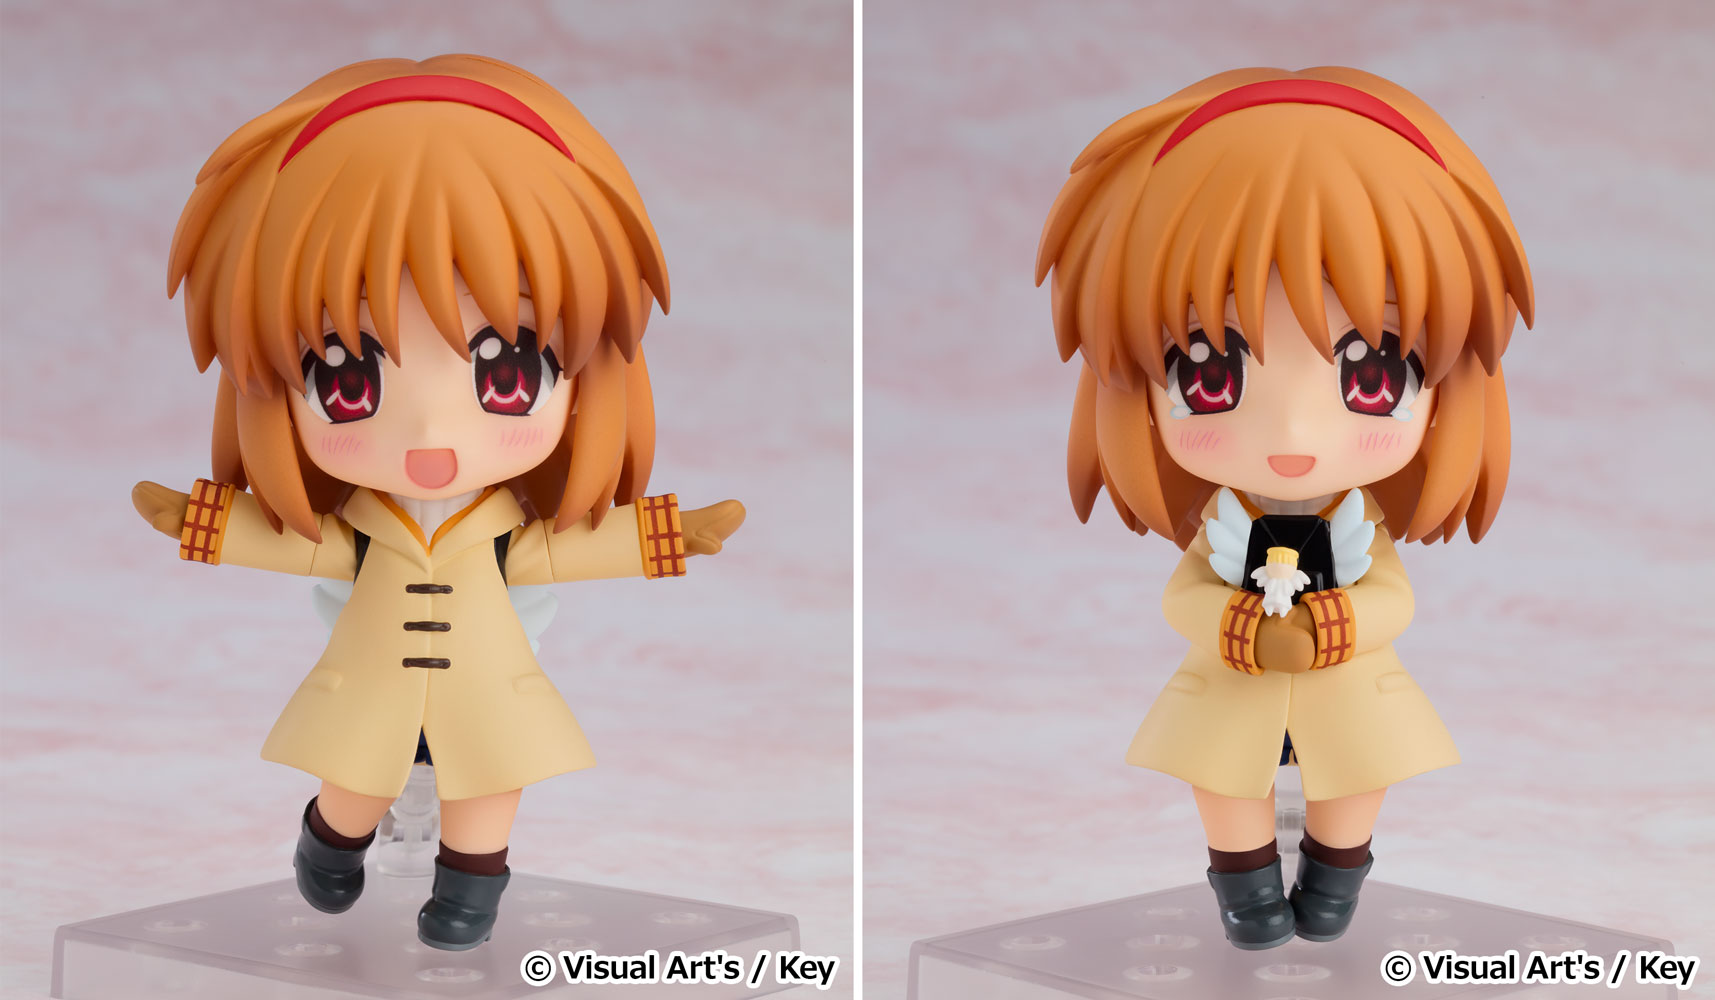 Nendoroid Ayu Tsukimiya Is Now Available For Pre Order